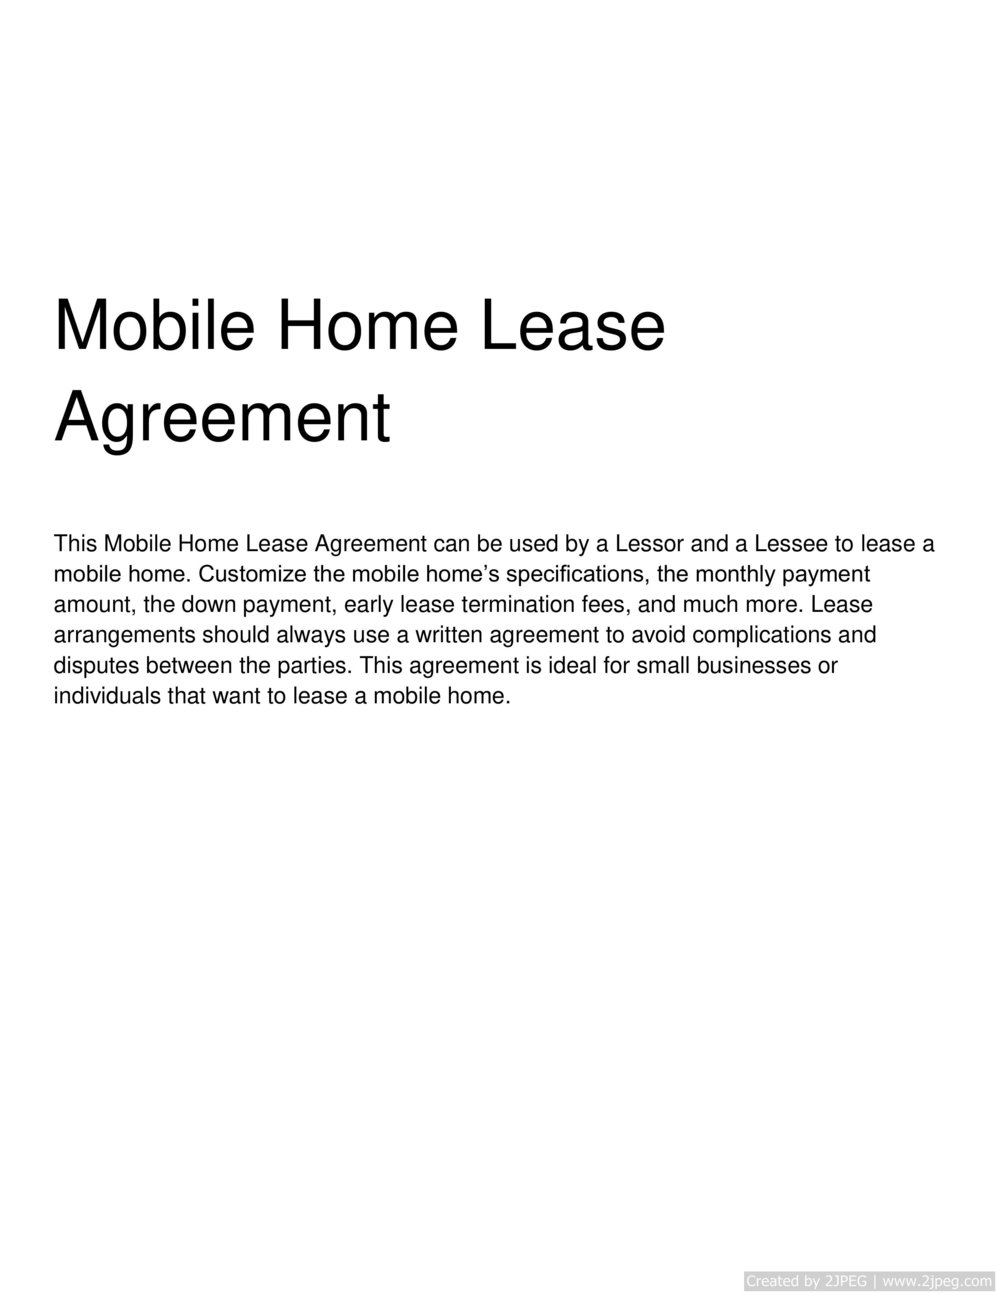 Mobile Home Lease Agreement Mobile Home Lease Agreement